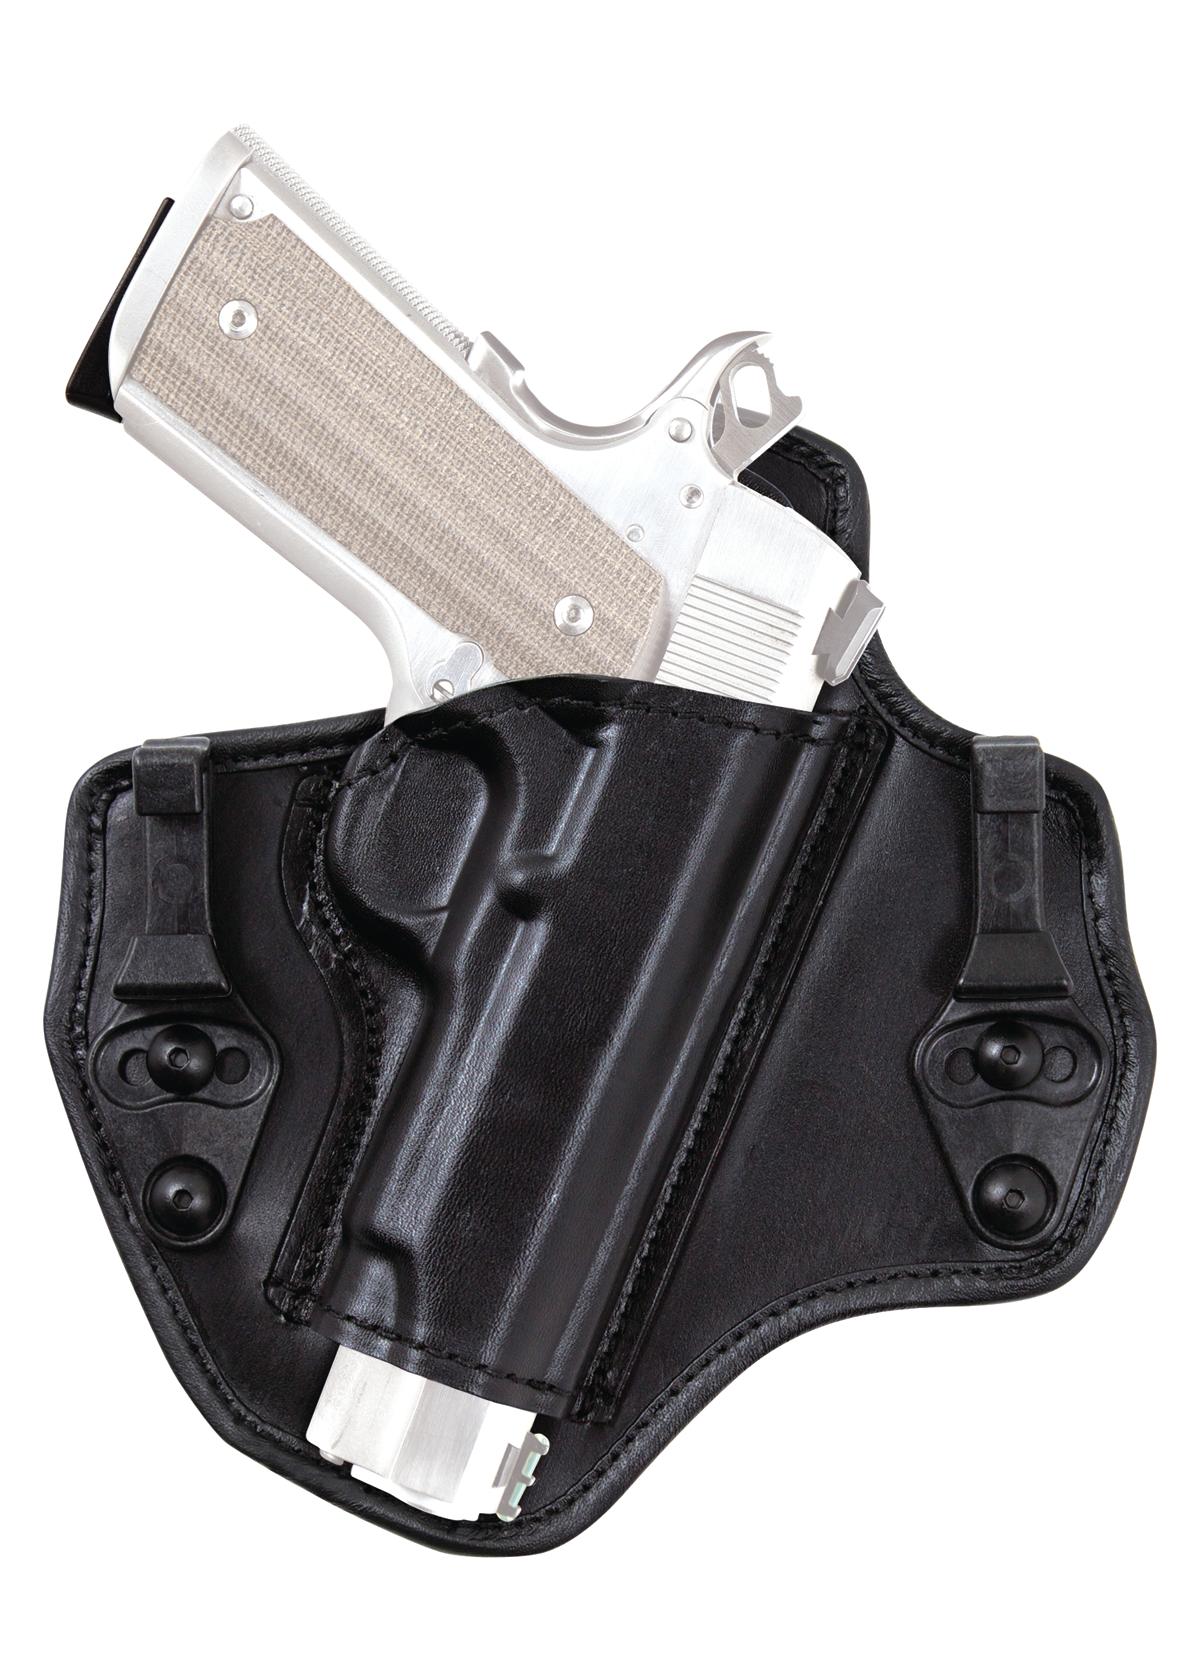 Model 135 Allusion Series Suppression Holster Size15 for Springf